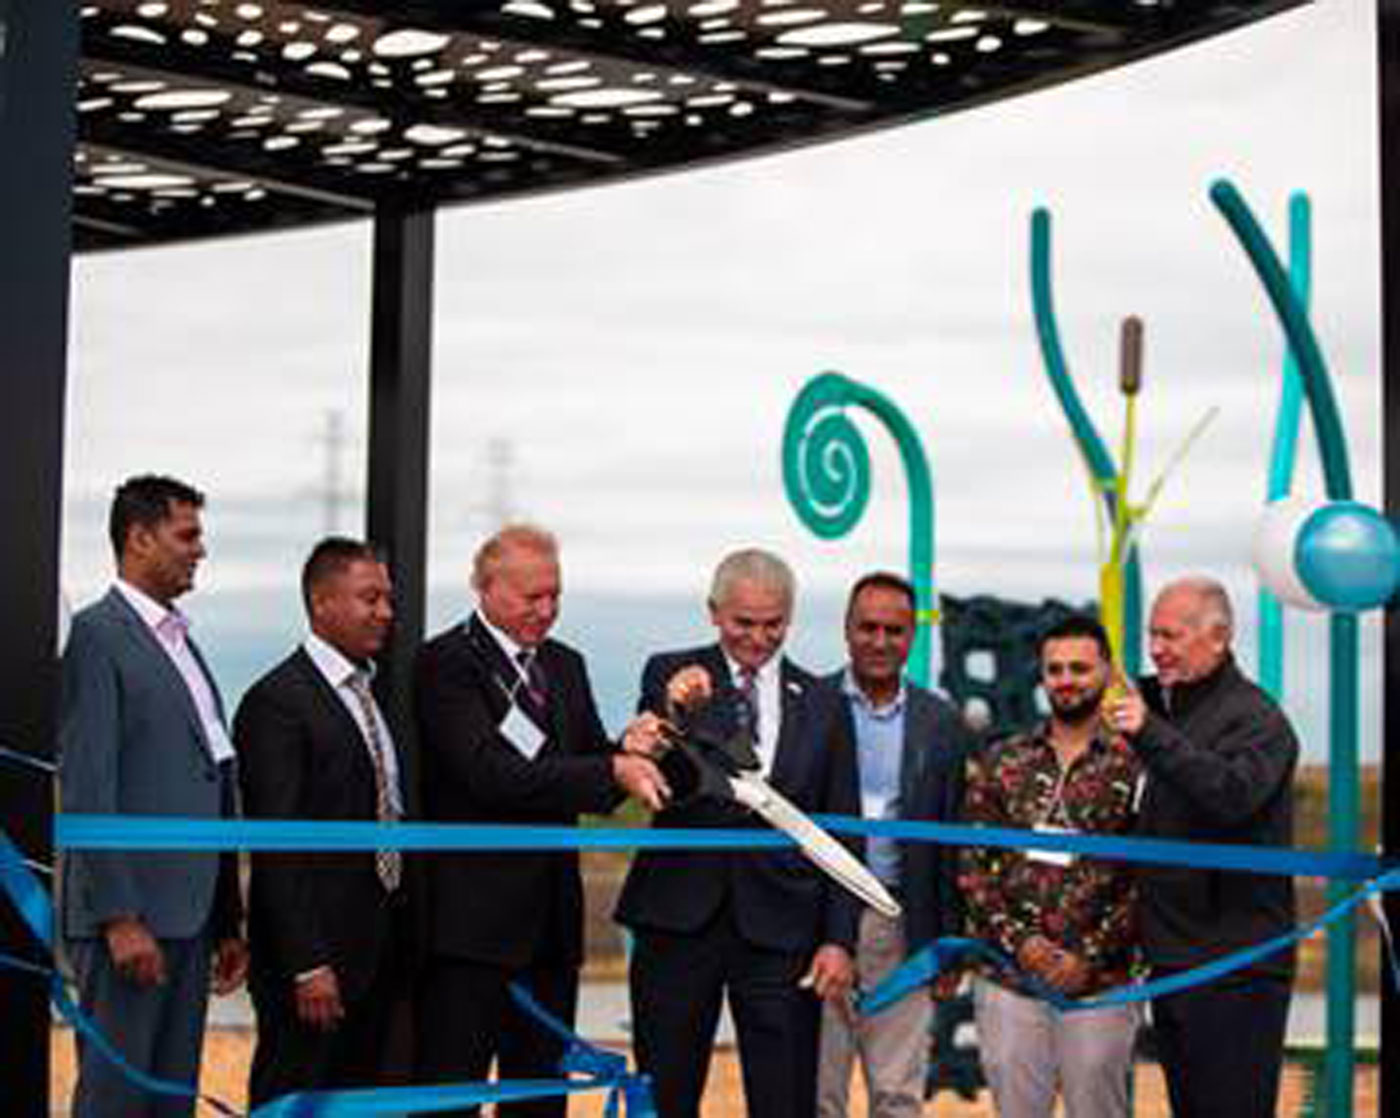 Chestermere-celebrates-official-ribbon-cutting-of-new-community-Waterford-pic-1